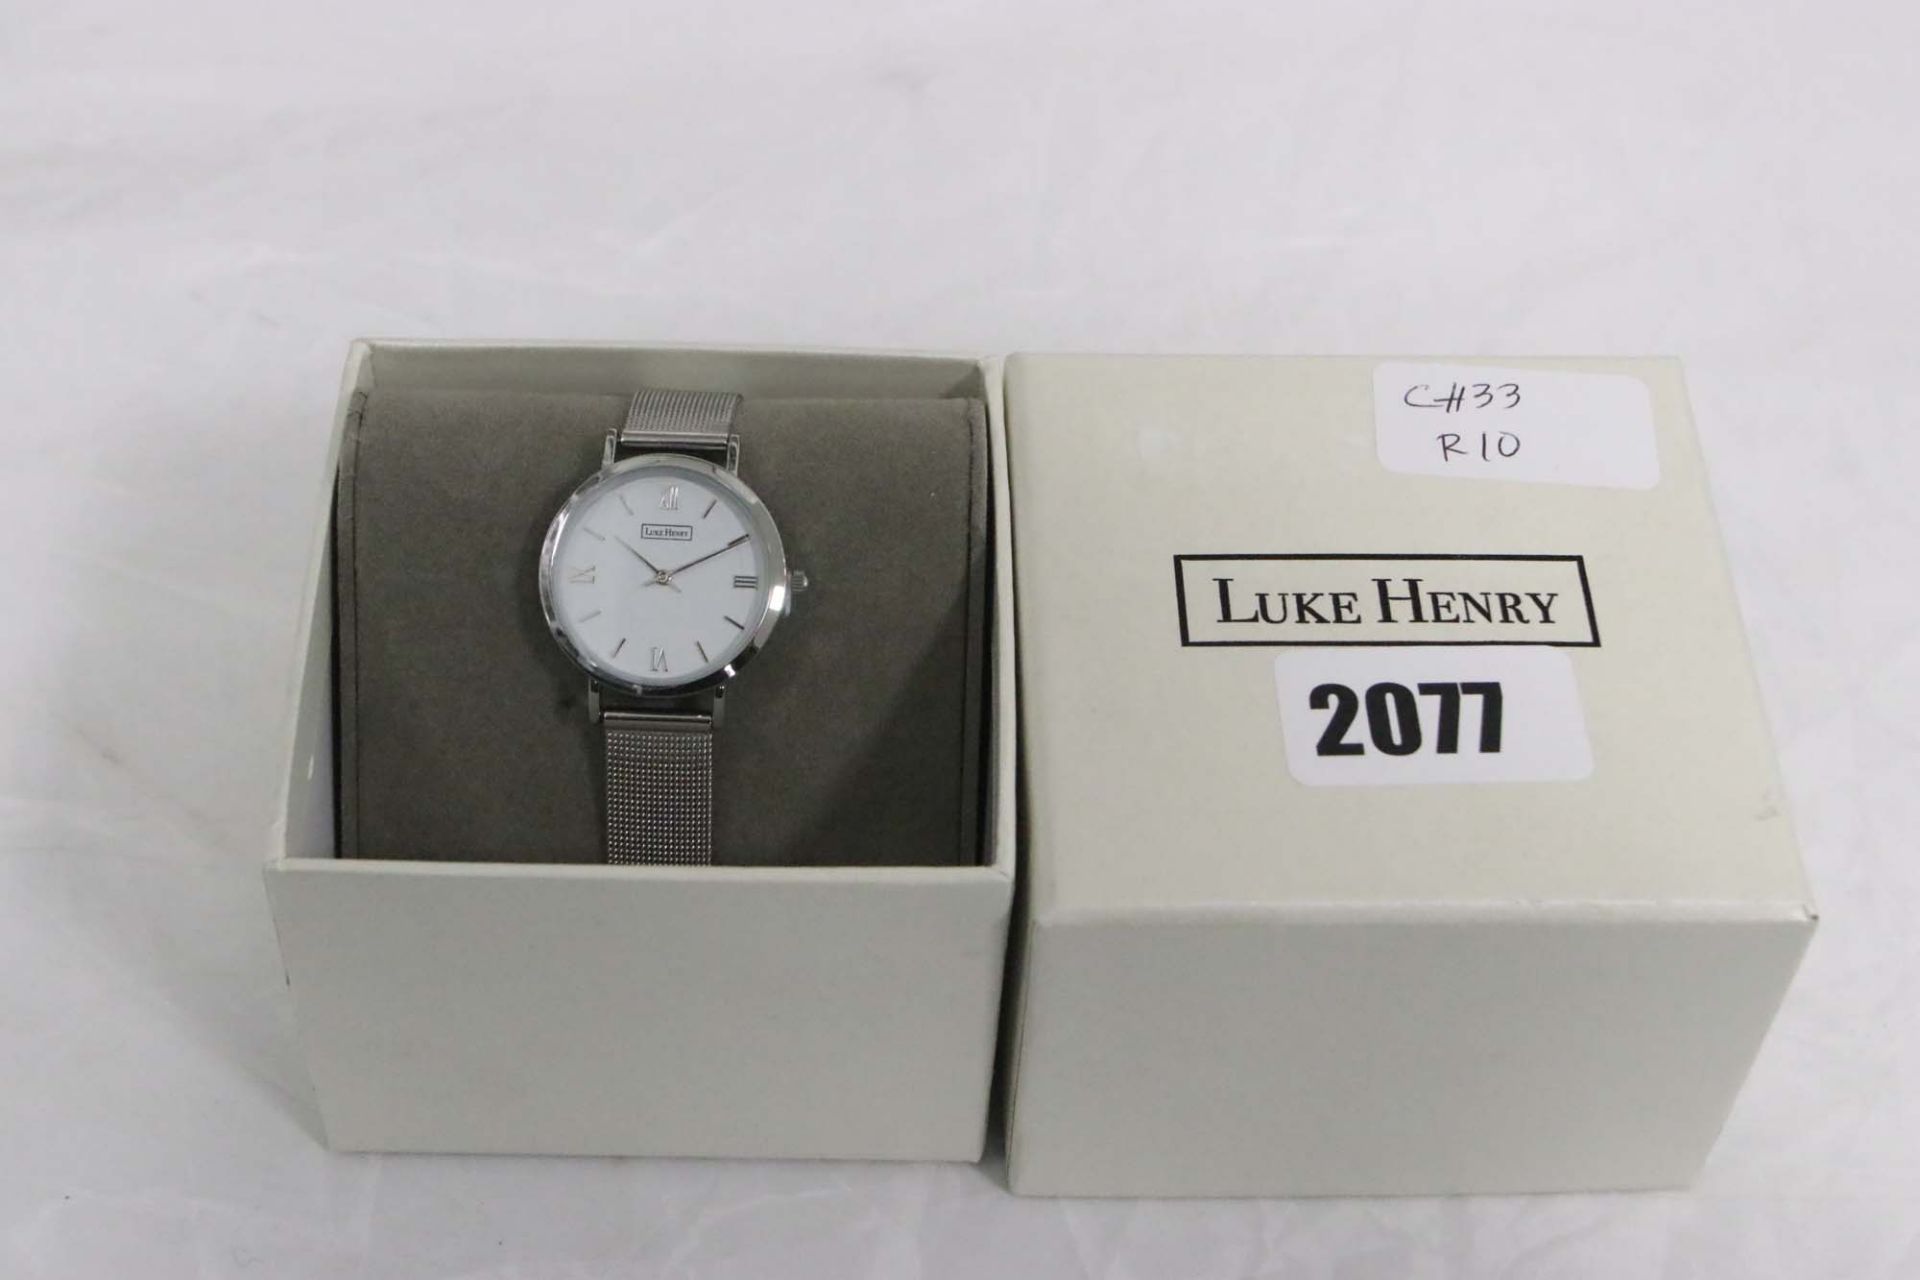 Luke Henry stainless steel strap ladies wristwatch with box